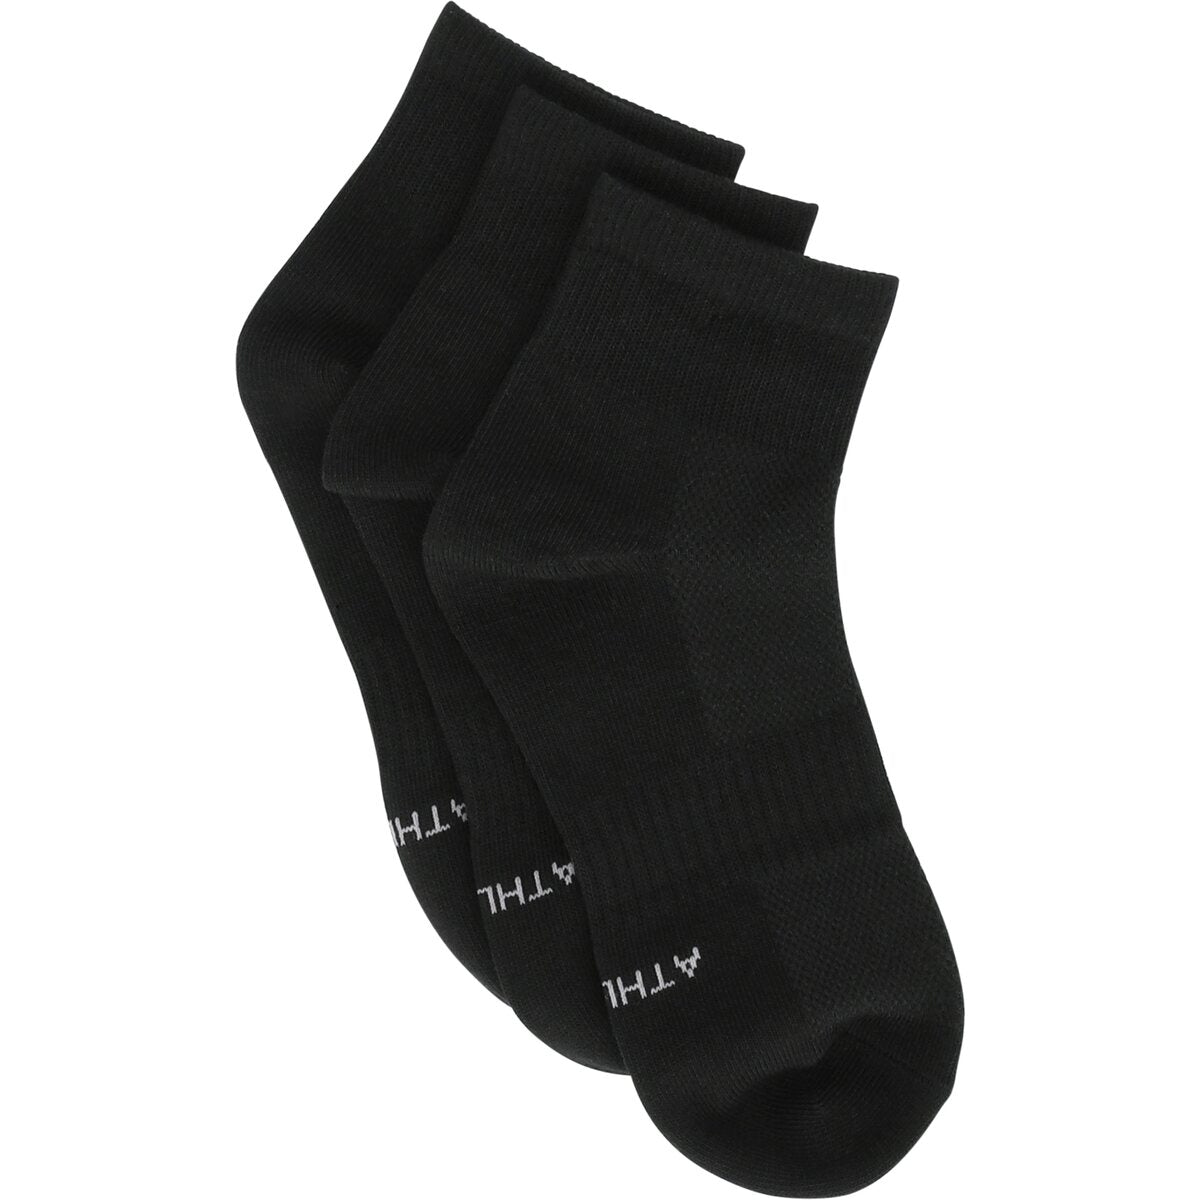 Athlecia Comfort-Mesh Sustainable Quarter Cut Sock 3-Pack - Black 2 Shaws Department Stores